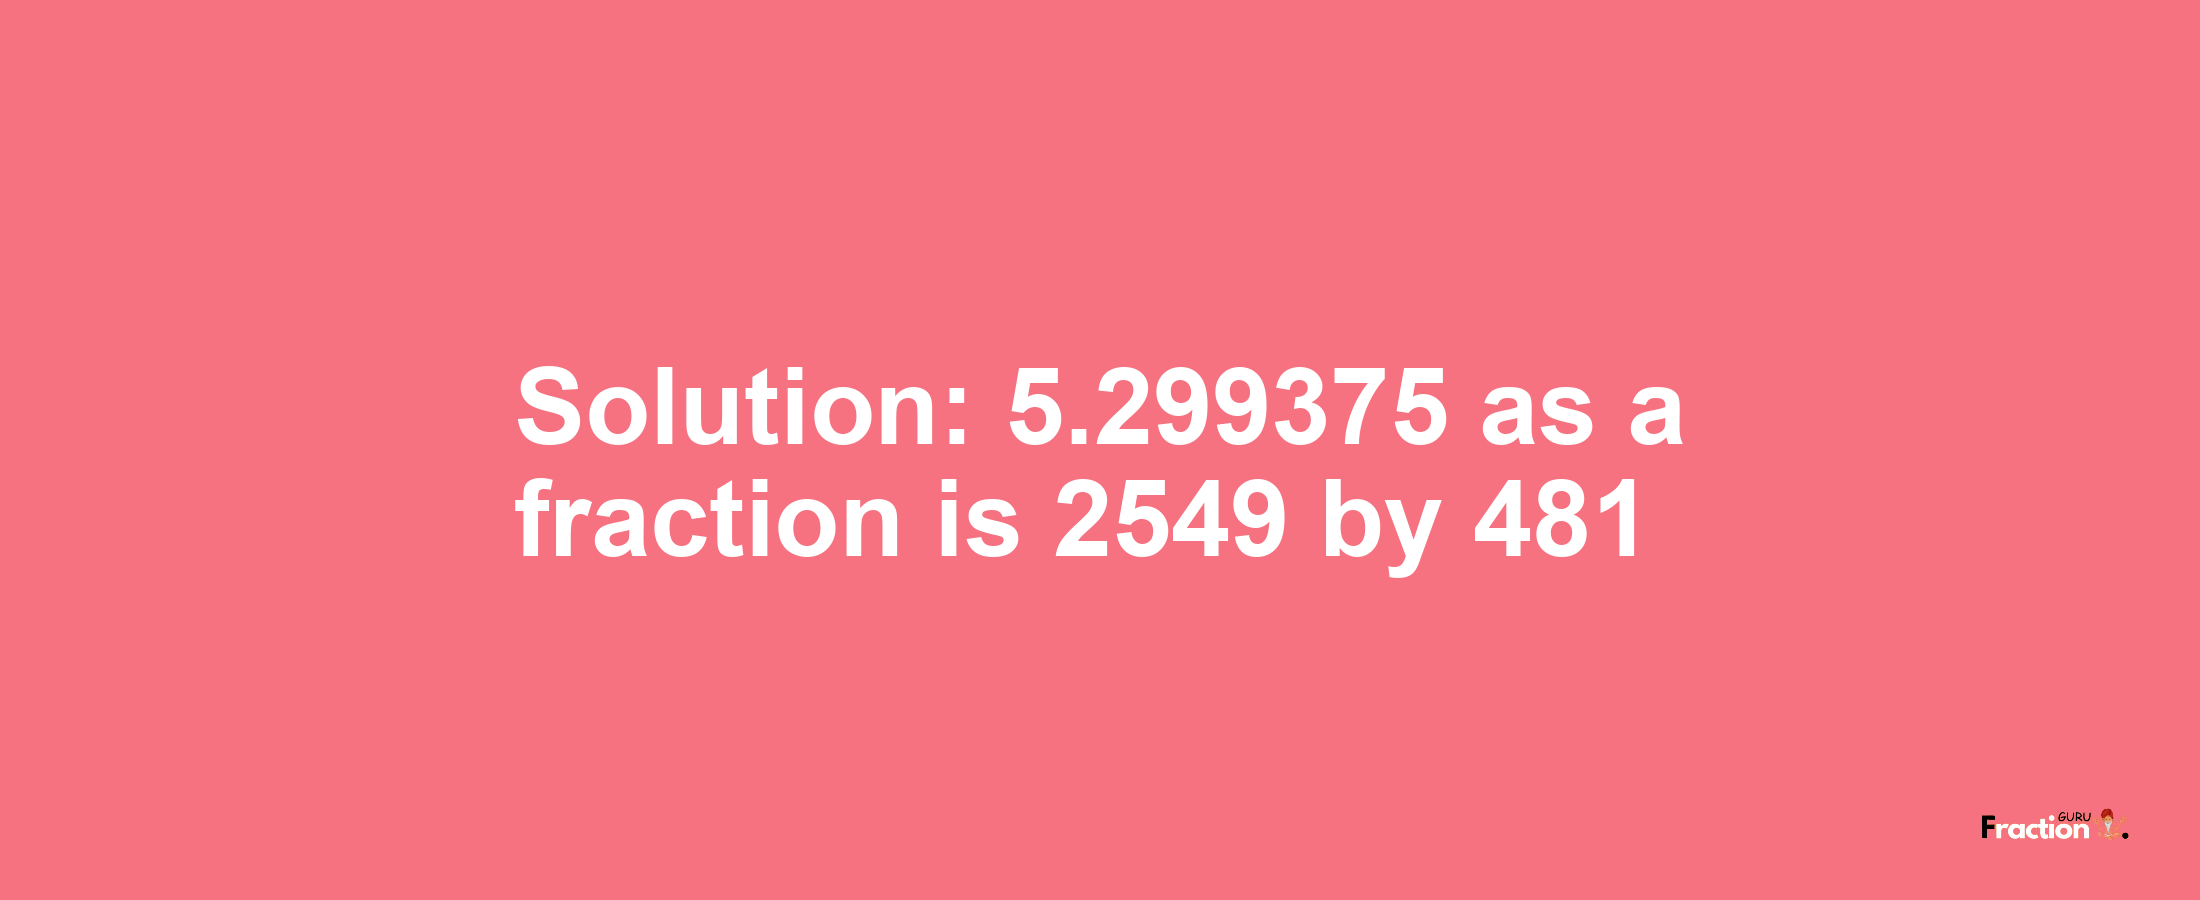 Solution:5.299375 as a fraction is 2549/481